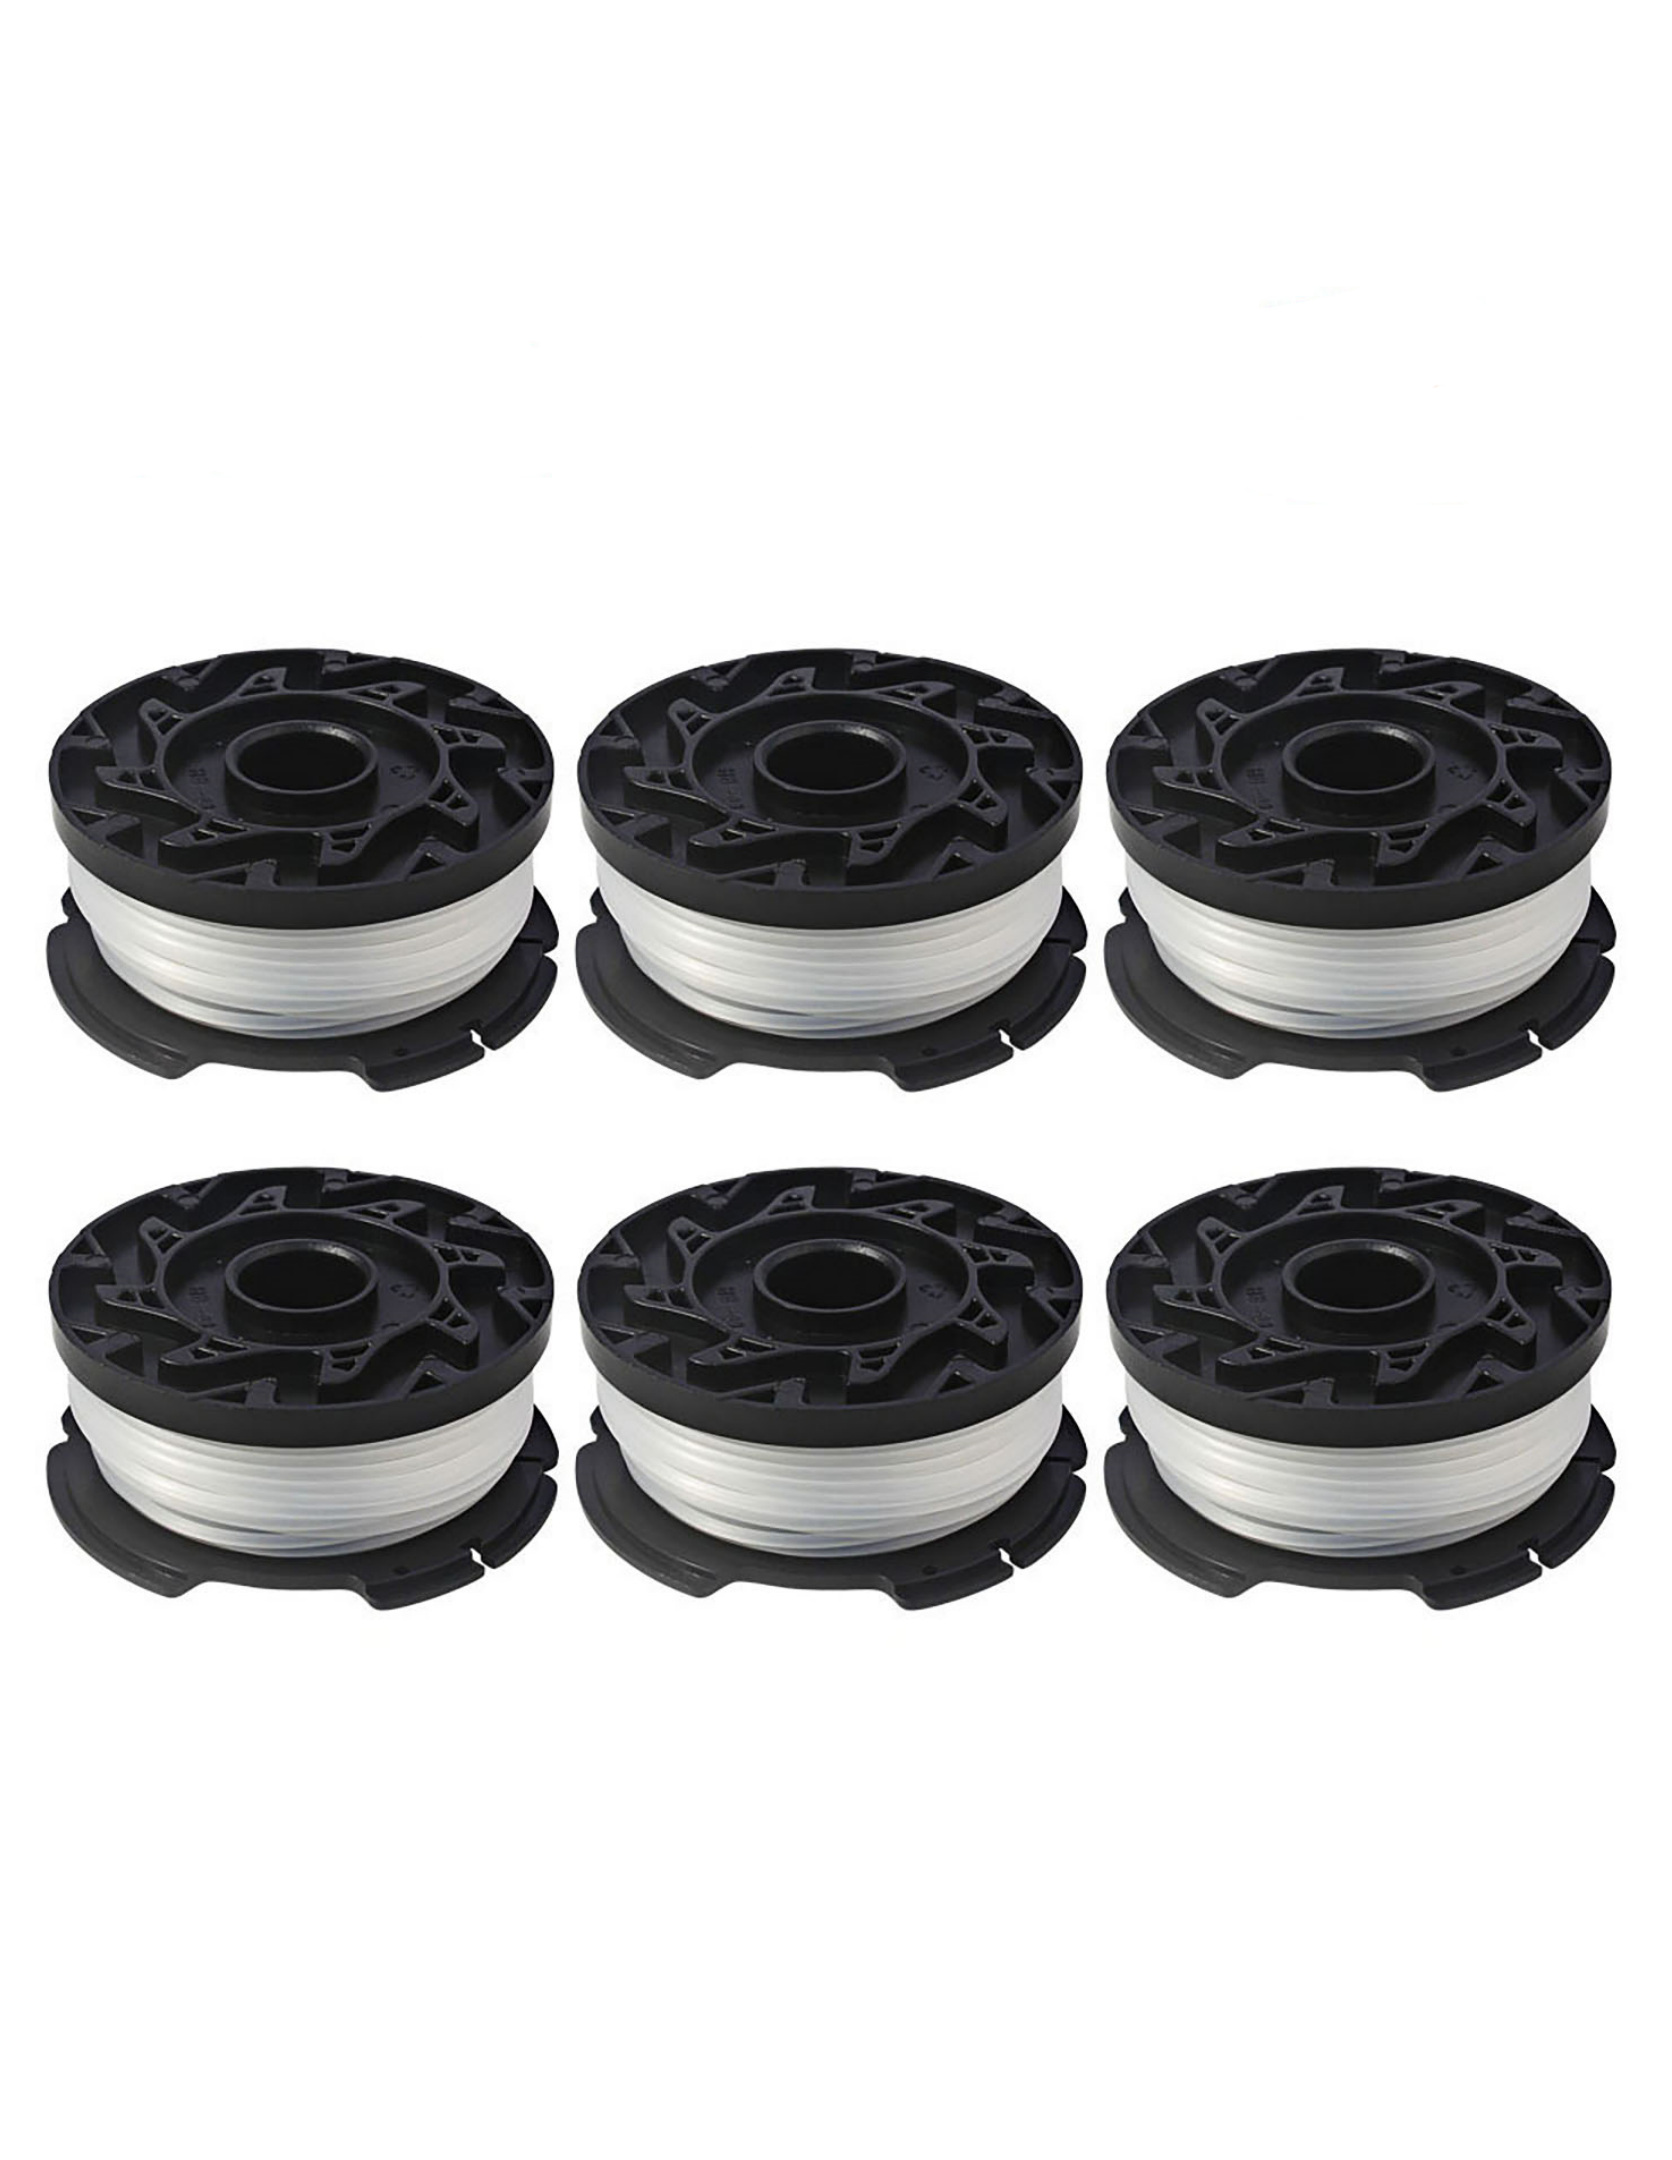 THTEN AF-100 Weed Eater Spools Compatible with Black Decker GH900 GH600 String Trimmer Replacement Spool Refills 30ft 0.065 Auto-Feed Single Lines Edger Parts Grass Trimmers (6 pcs)